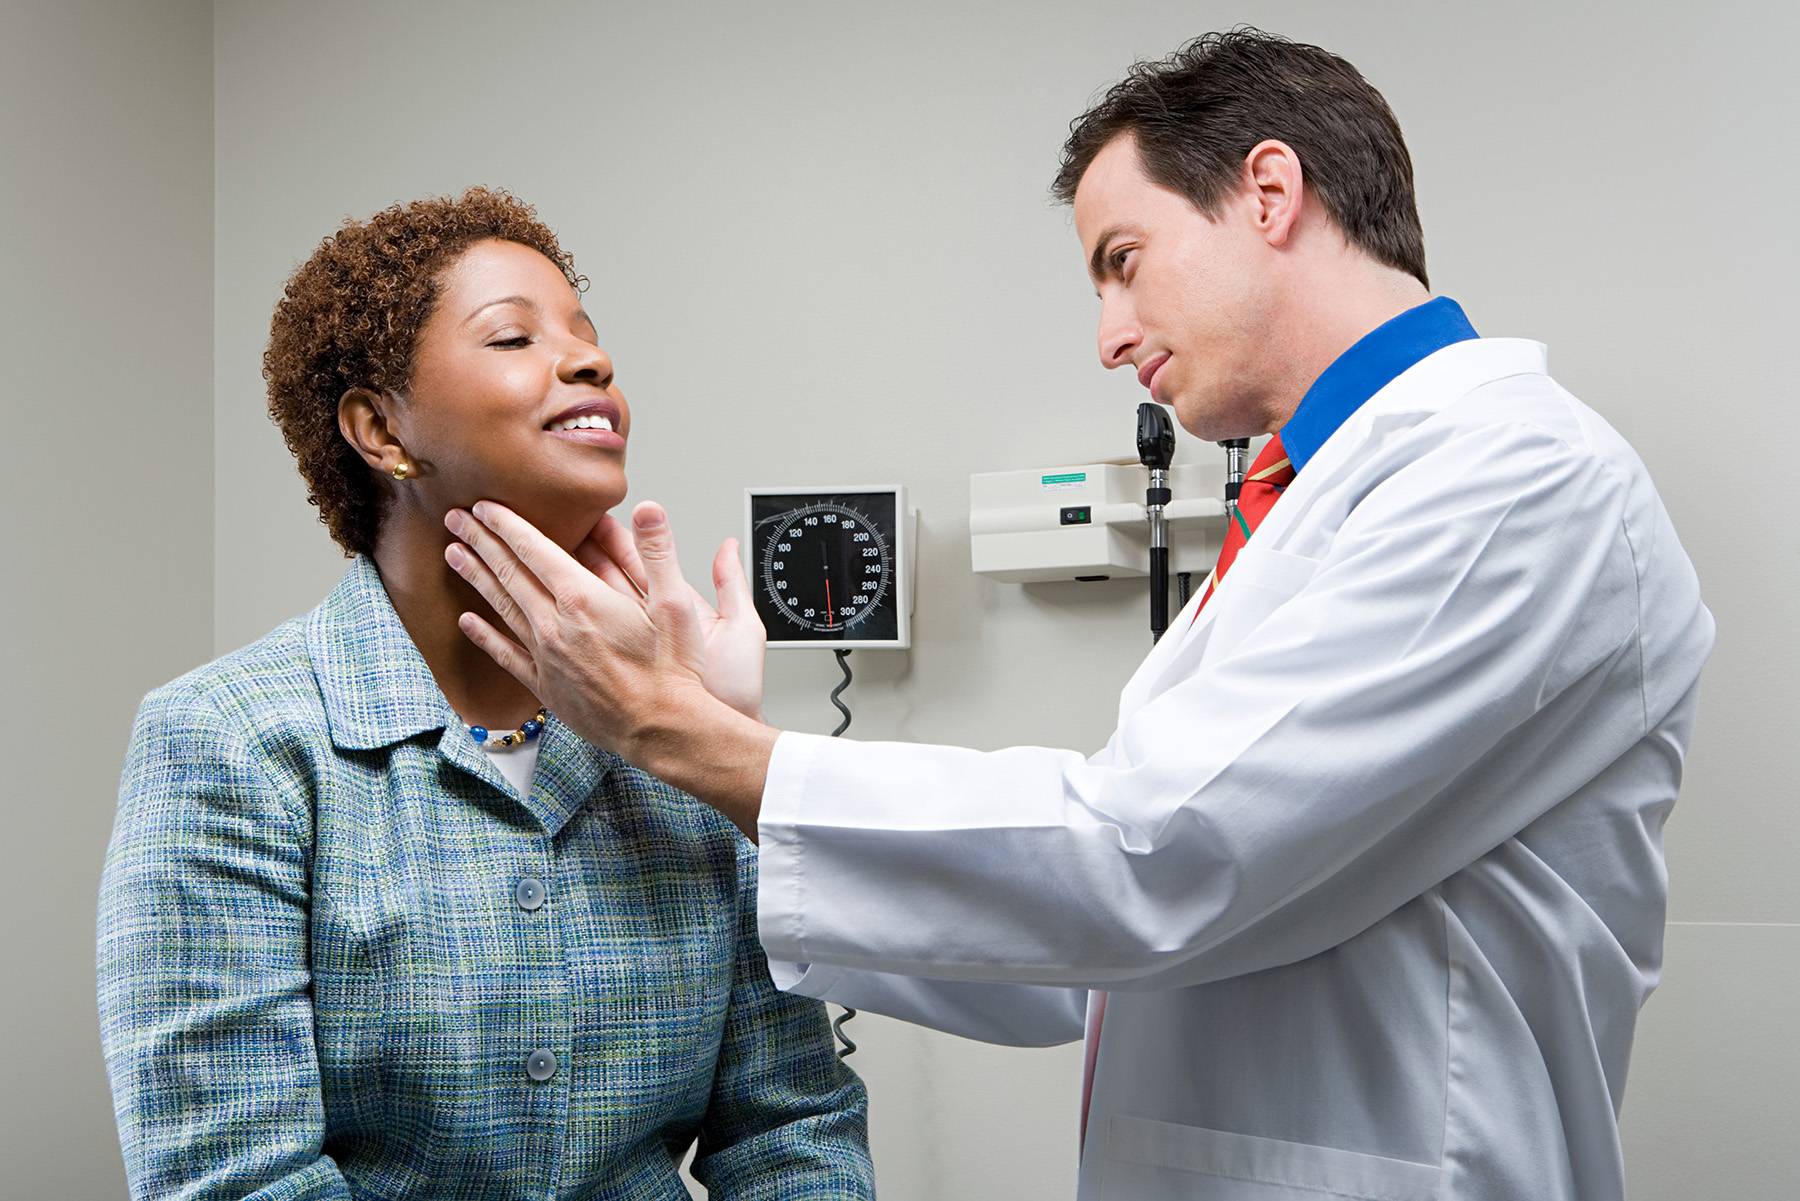 What Do You Know About Your Thyroid?